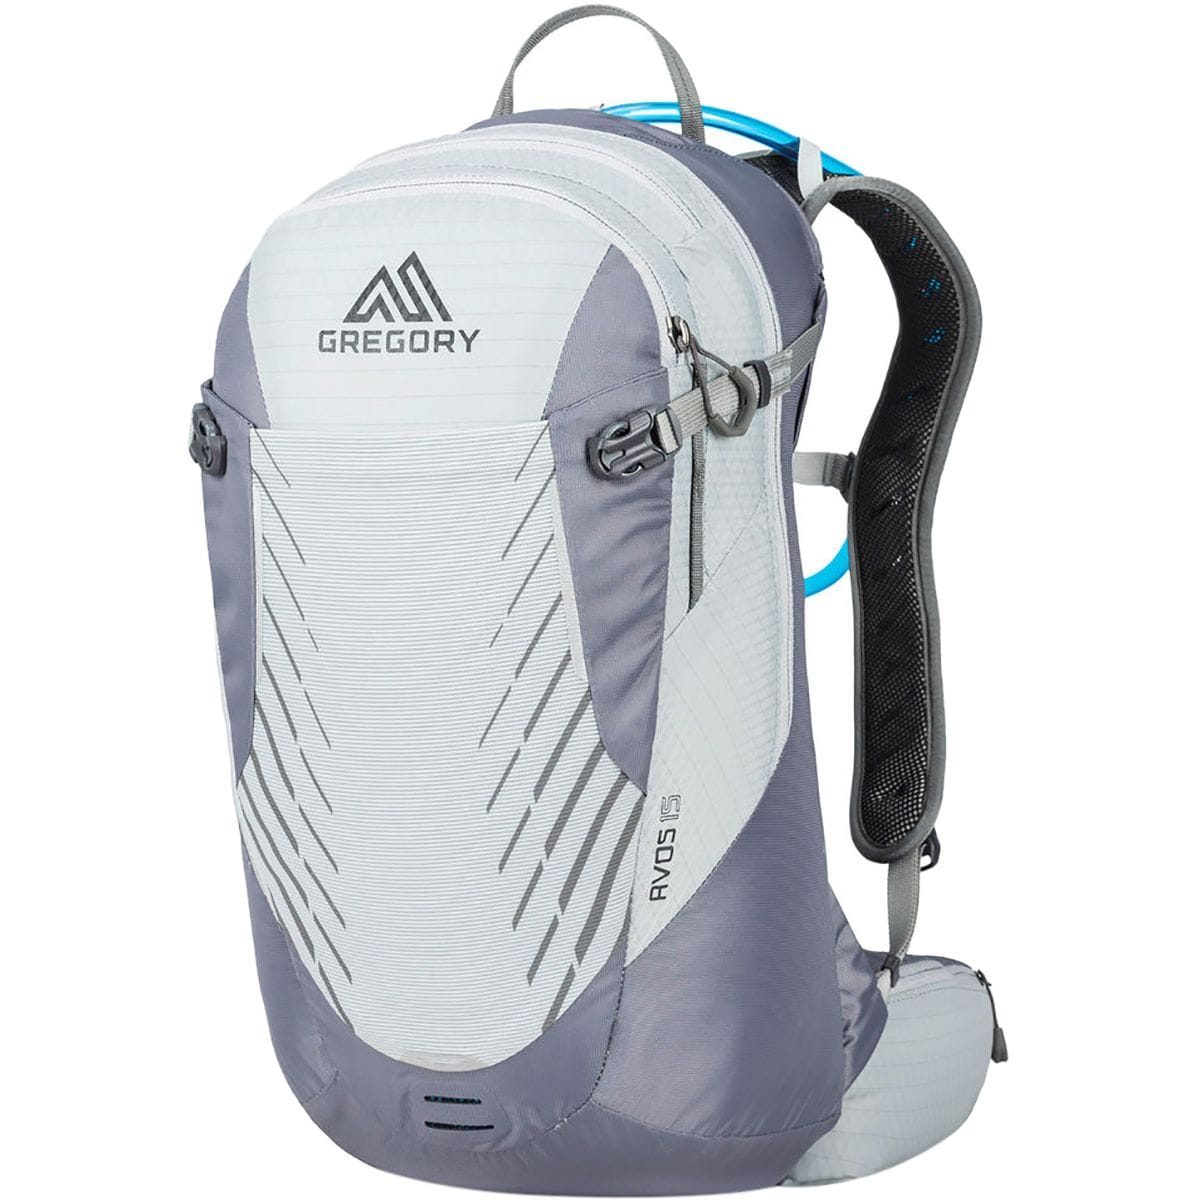 Photos - Backpack Gregory Avos 15L Hydration  - Women's 